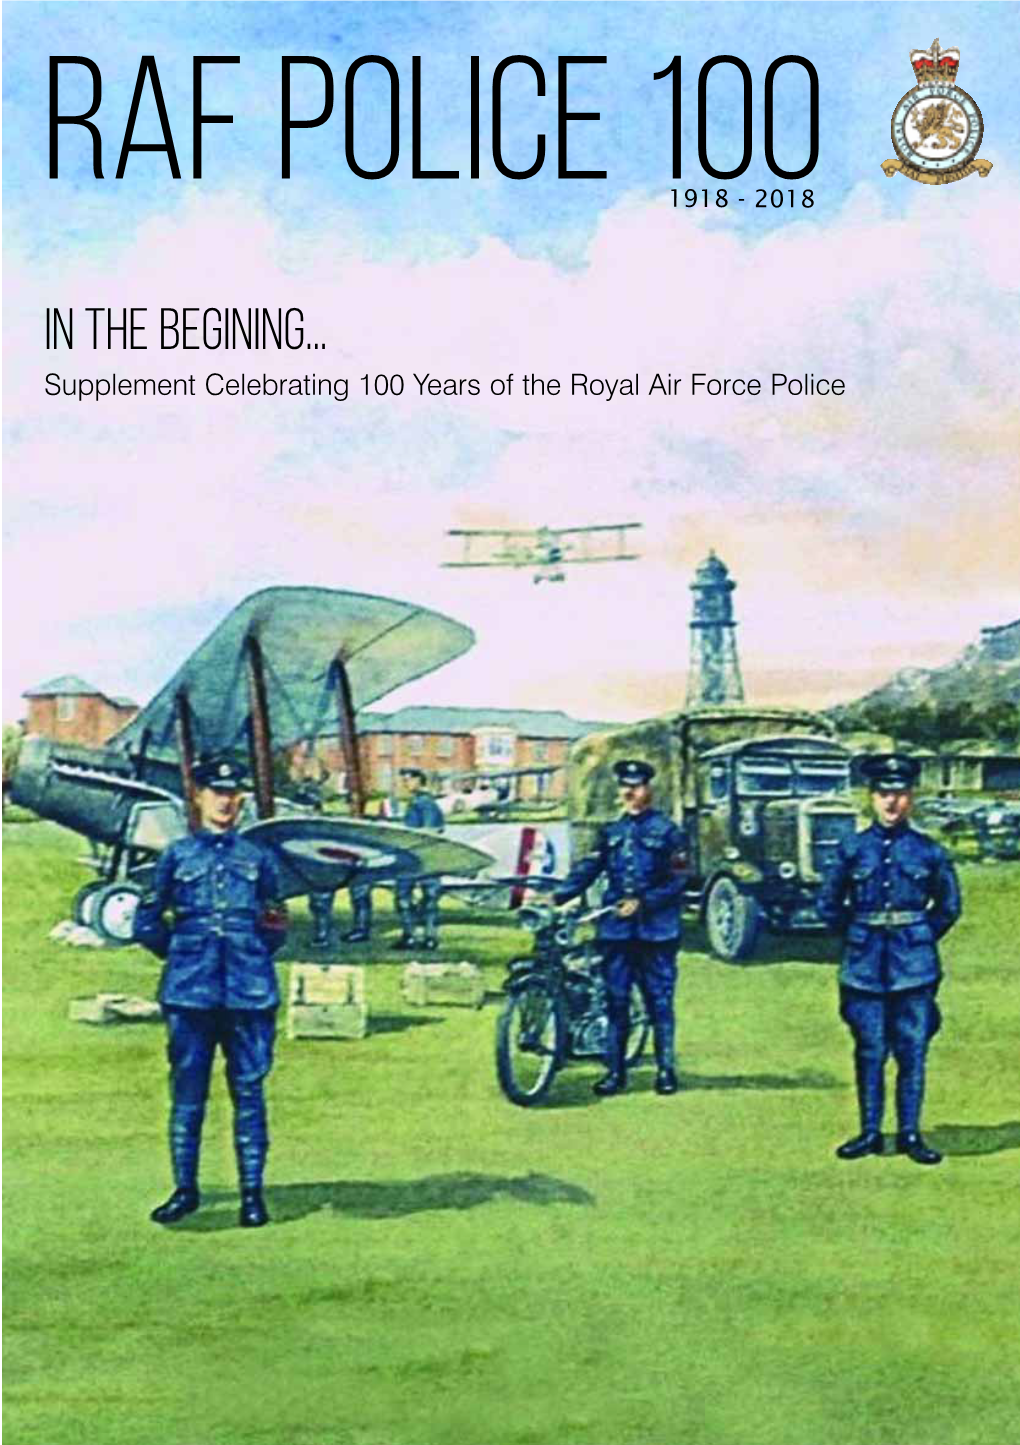 In the Begining... Supplement Celebrating 100 Years of the Royal Air Force Police RAFP Centenary 1918 - 2018